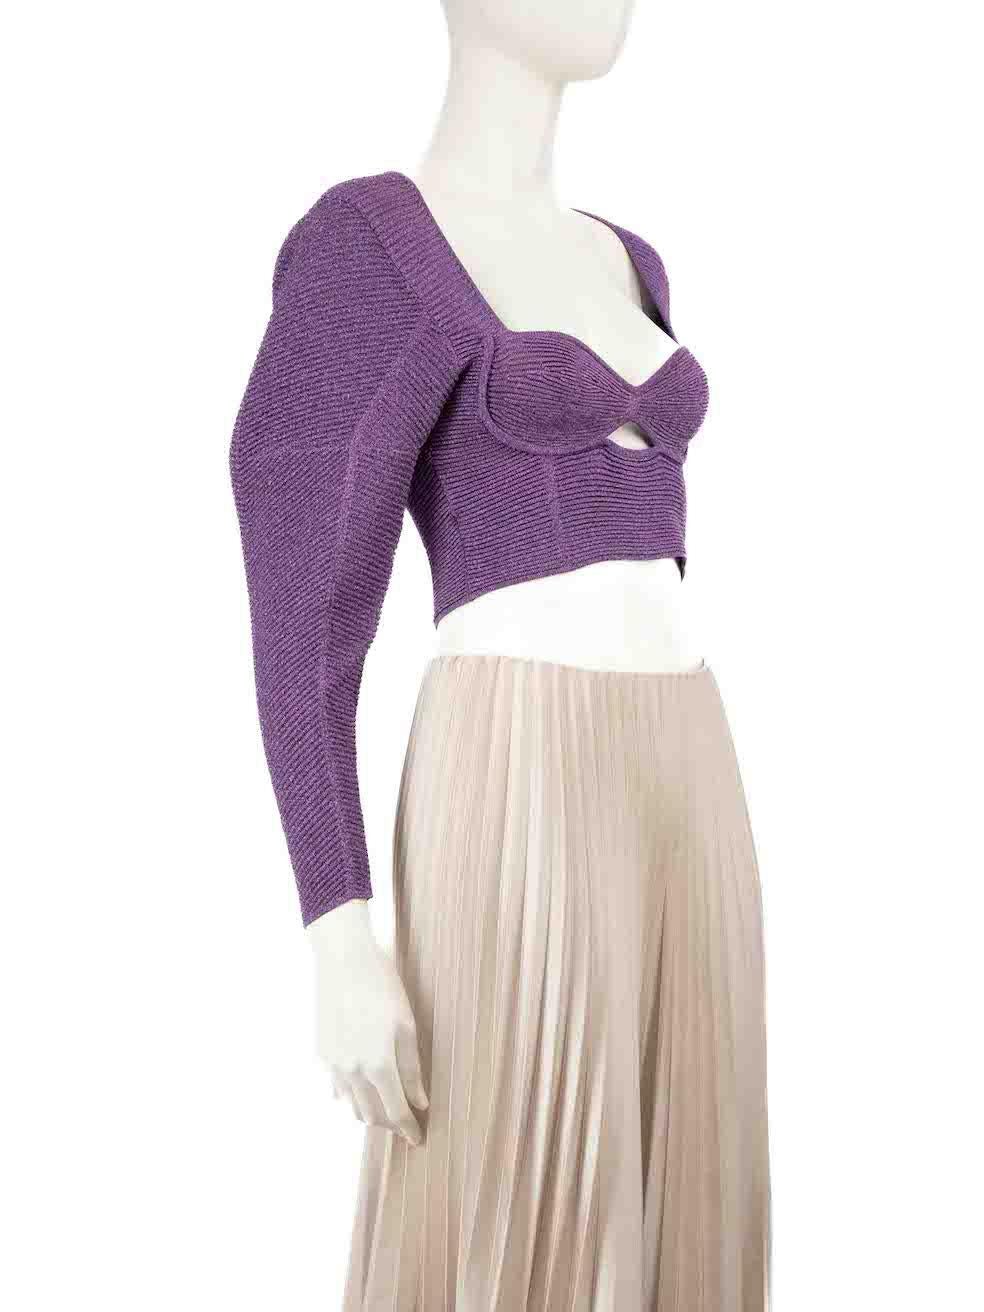 CONDITION is Very good. Minimal wear to top is evident. Some small pulls to the thread on the inside can be seen on this used Herve Leger designer resale item.
 
 
 
 Details
 
 
 Purple
 
 Viscose
 
 Top
 
 Metallic thread
 
 Cut out detail
 
